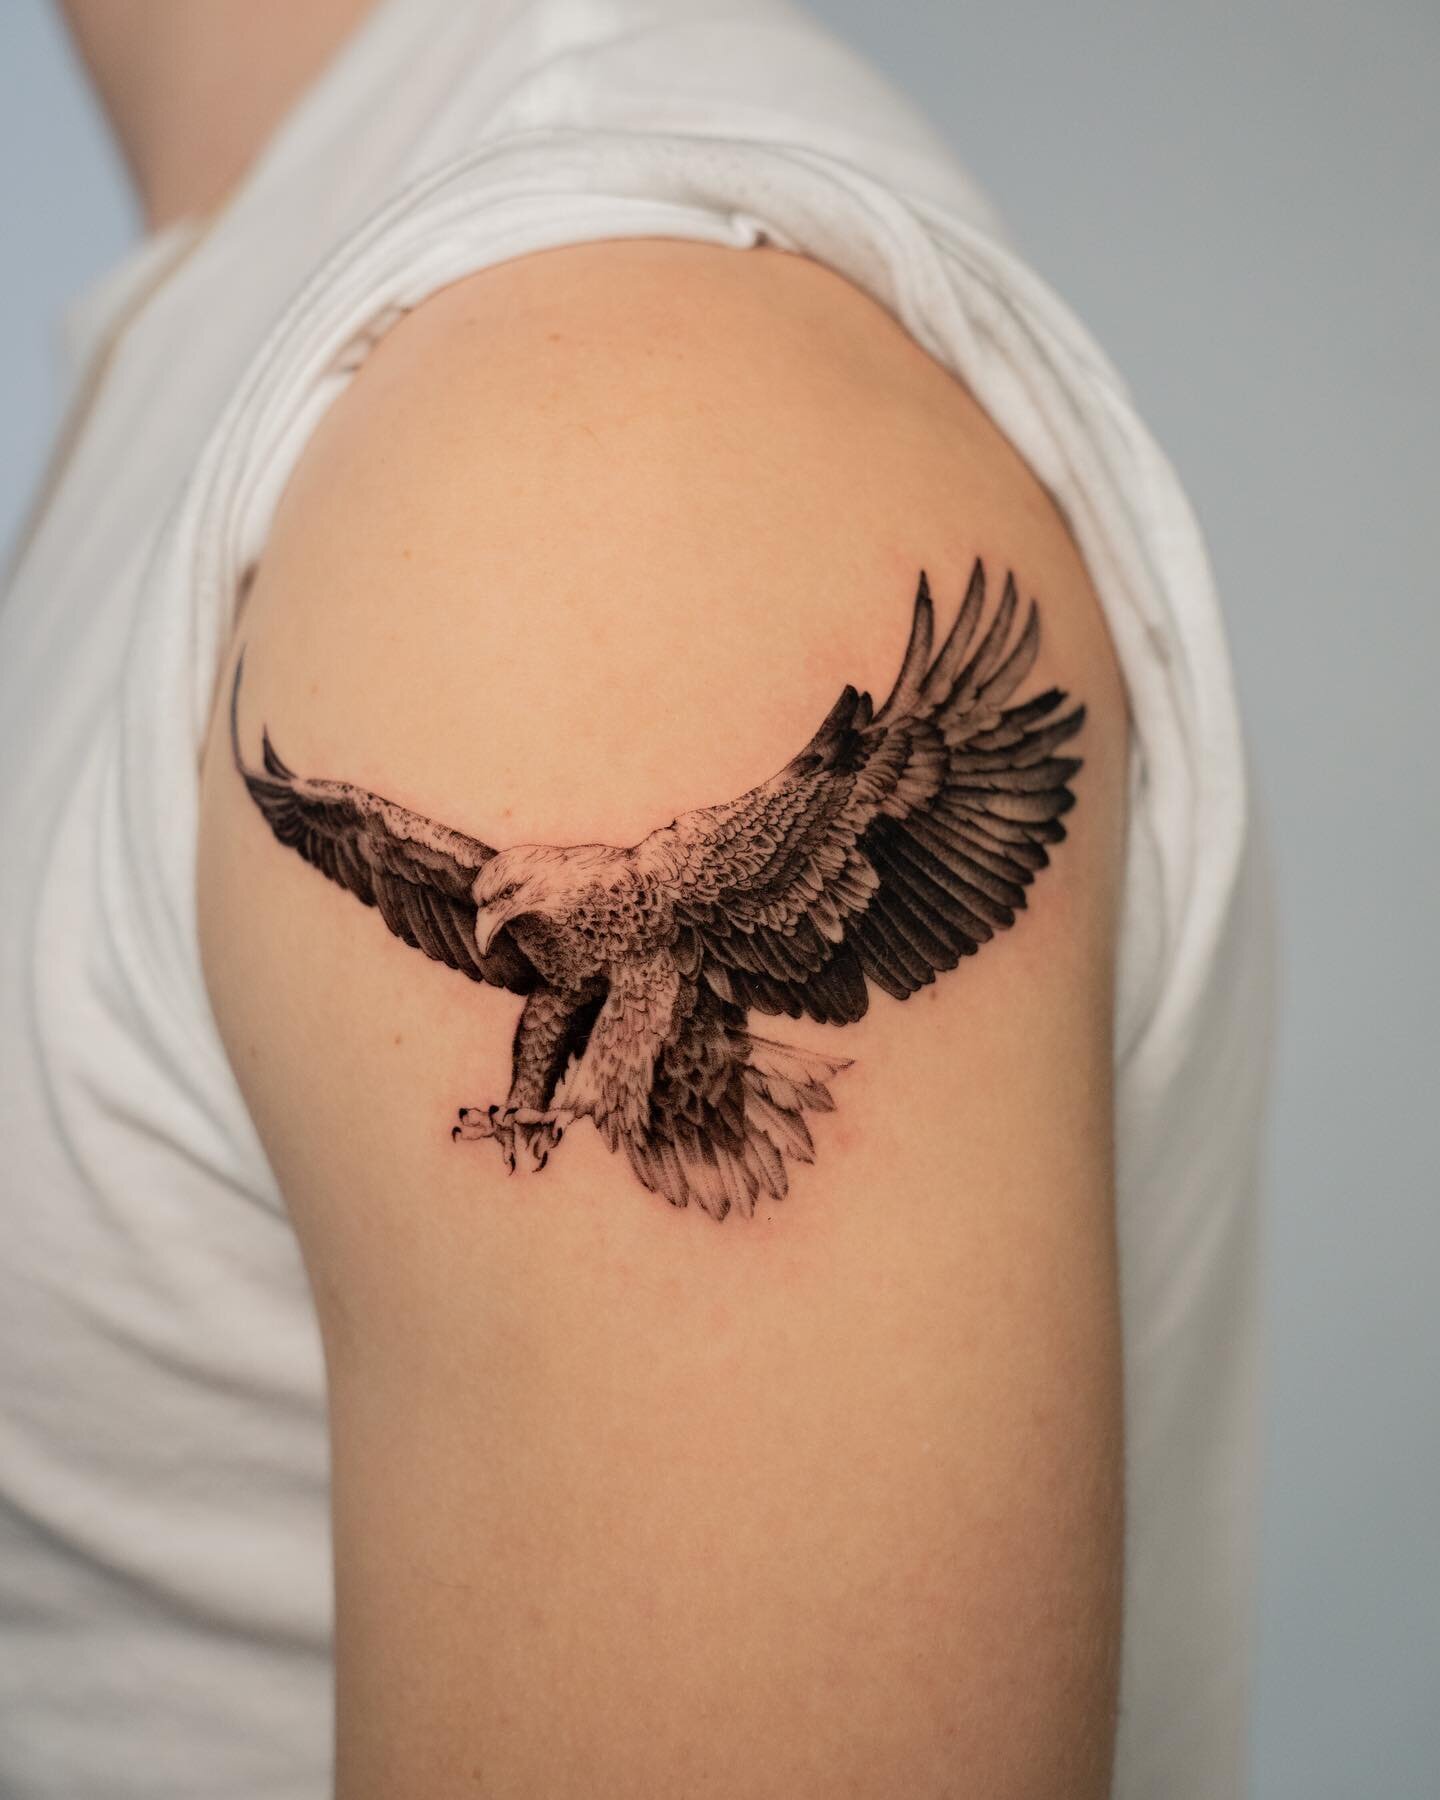 An eagle in flight. Thanks, Melchior. 

.

All likes, saves, comments, and shares are appreciated :). 

.

lornetattoos.ca for booking. 

.

#tuesdaytoptags #floraltattoo 
#torontoink #torontotattoo #torontotattooartist #torontoinknews #canadiantatto